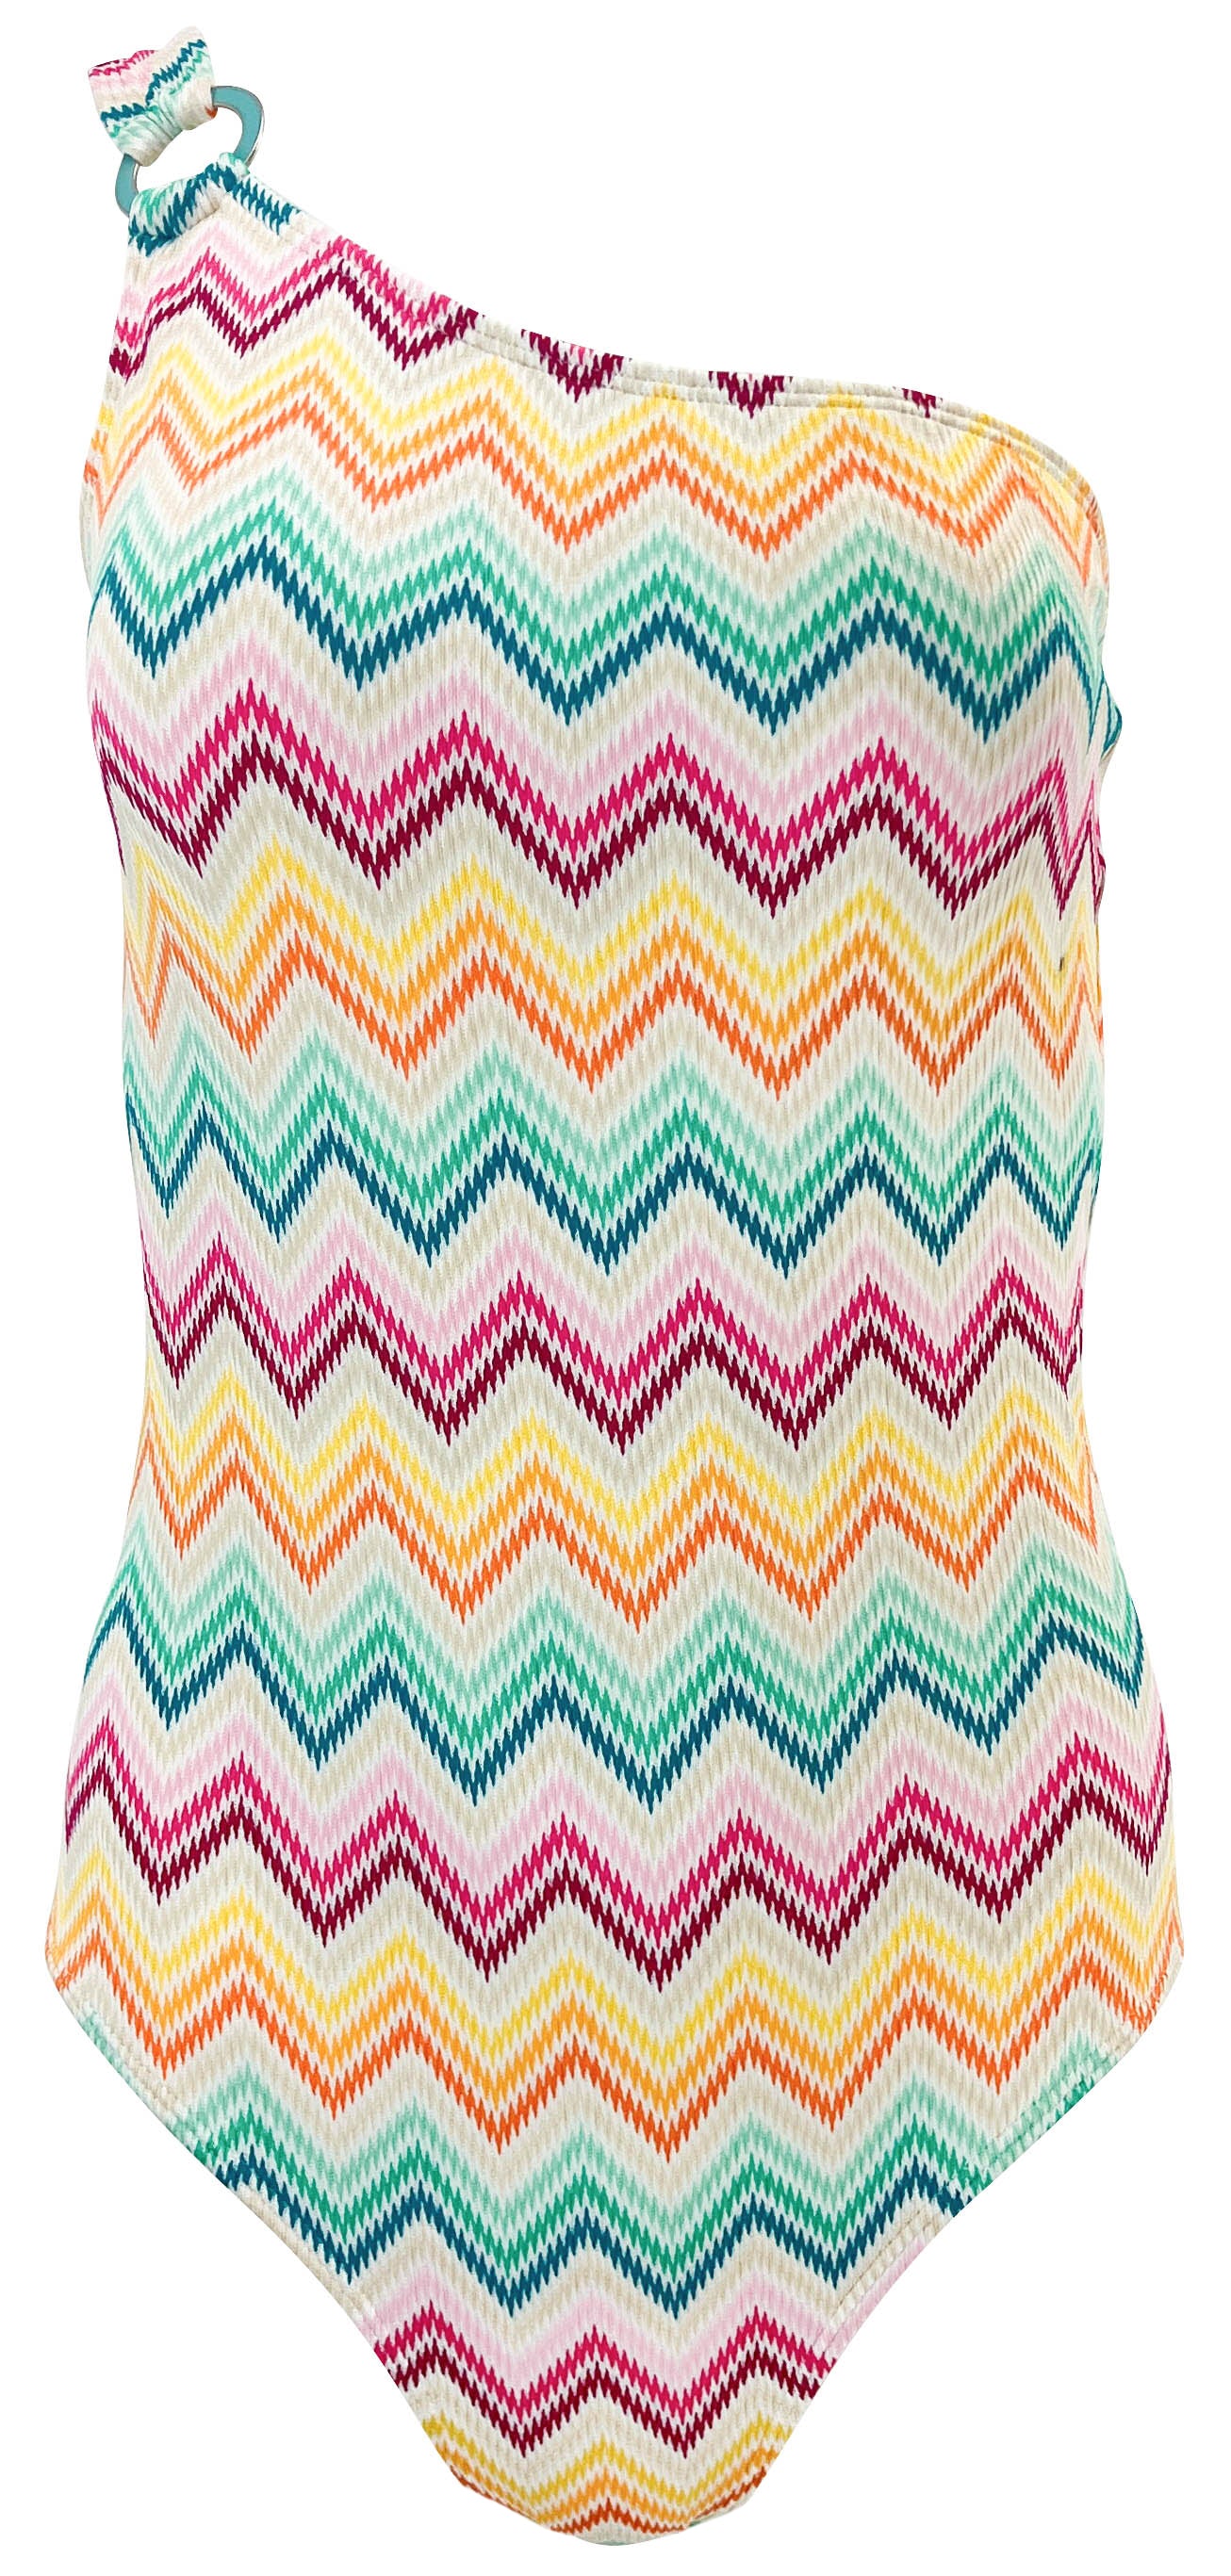 Shoshanna Asymmetric Turquoise Ring One-Piece Swimsuit in Chevron Multi - Discounts on Shoshanna at UAL